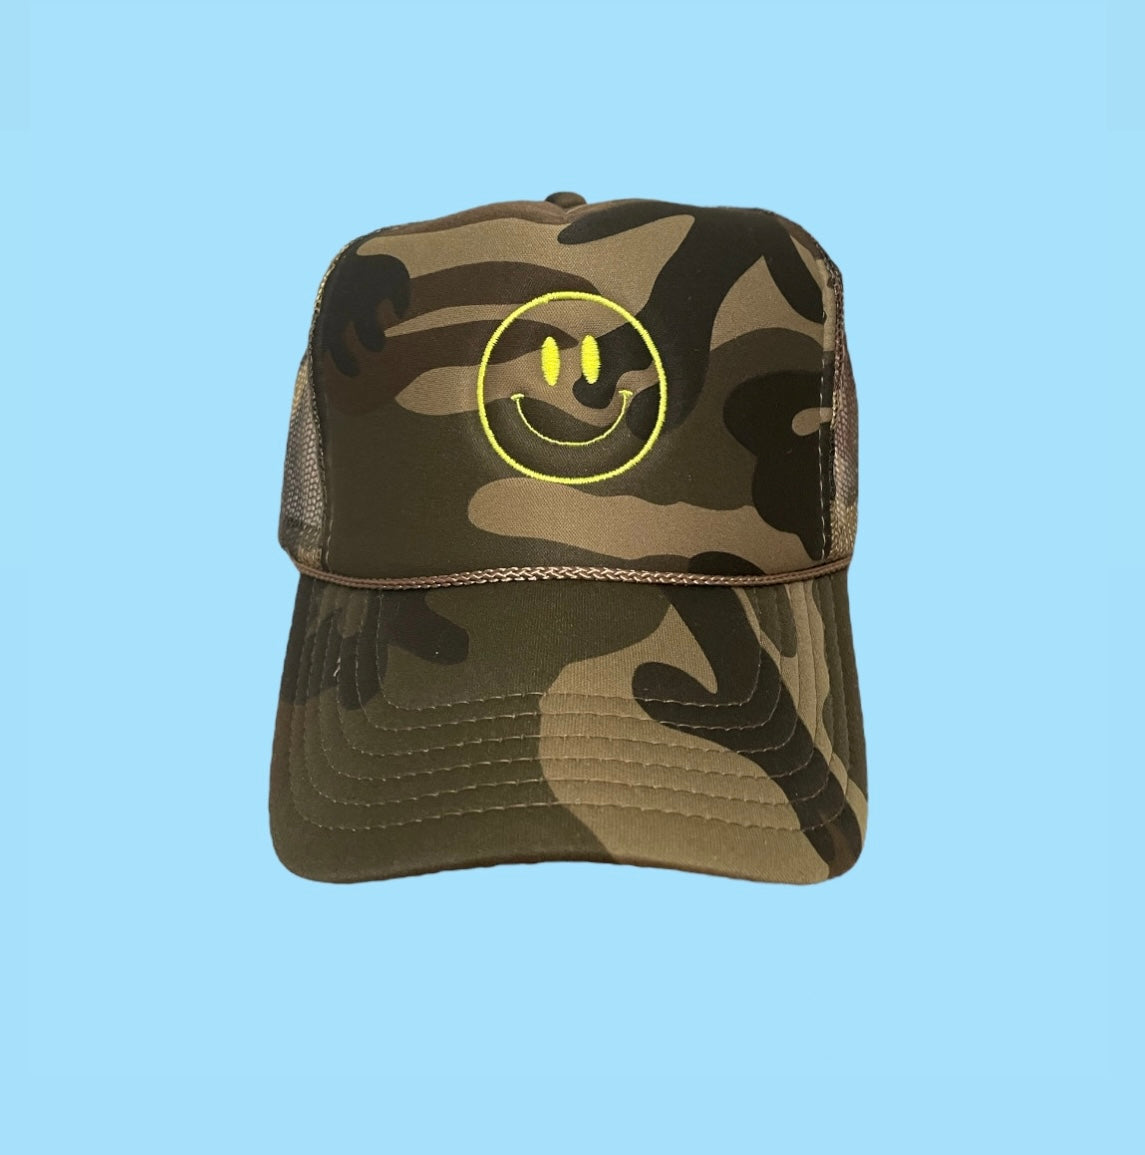 Smiley Face HAPPY Trucker Hat (Multiple Color Variations)